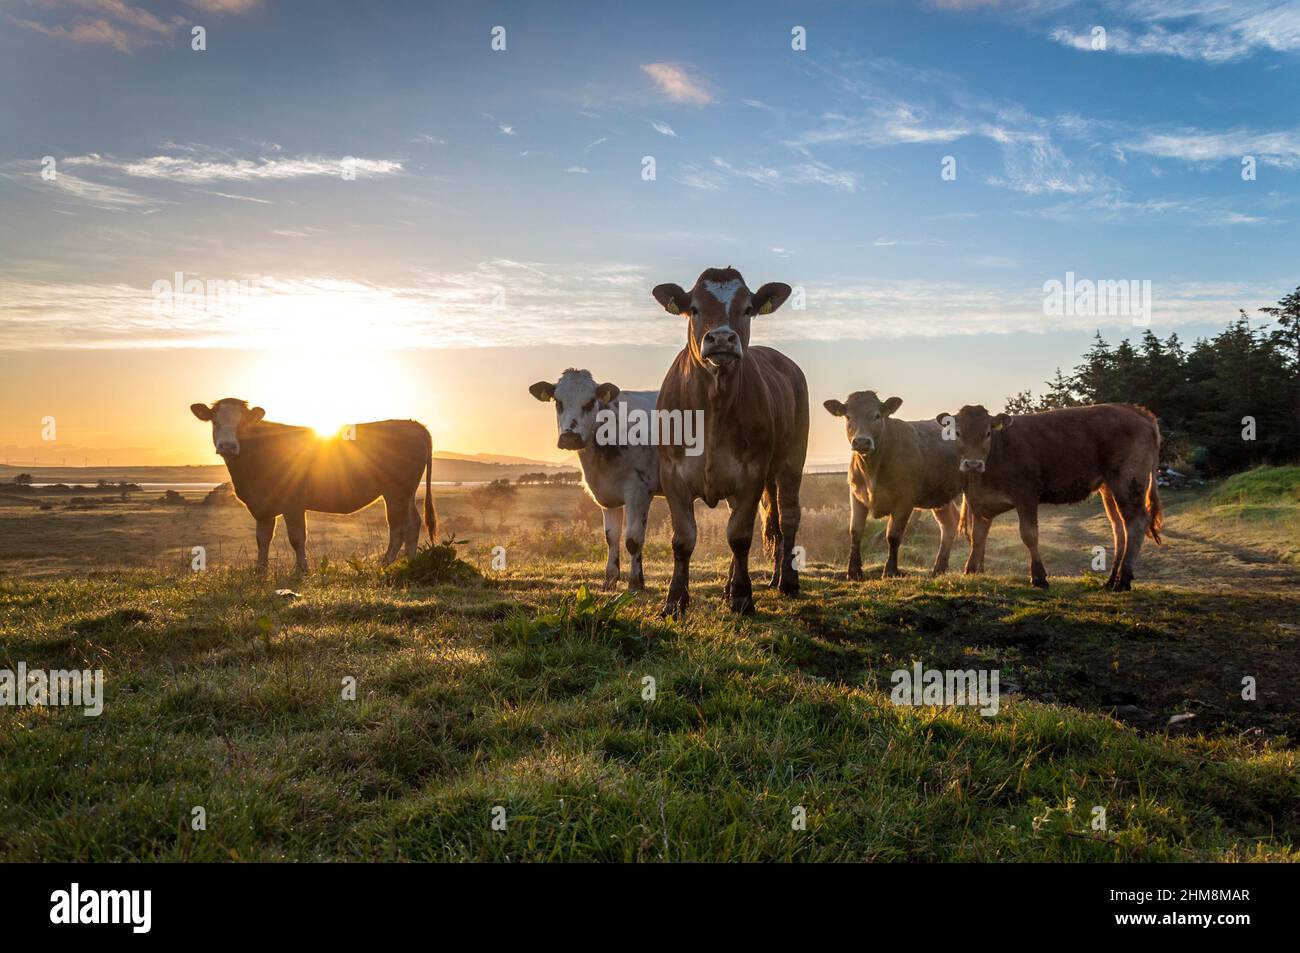 Beef cattle livestock sunrise, County Donegal, Ireland Stock Photo